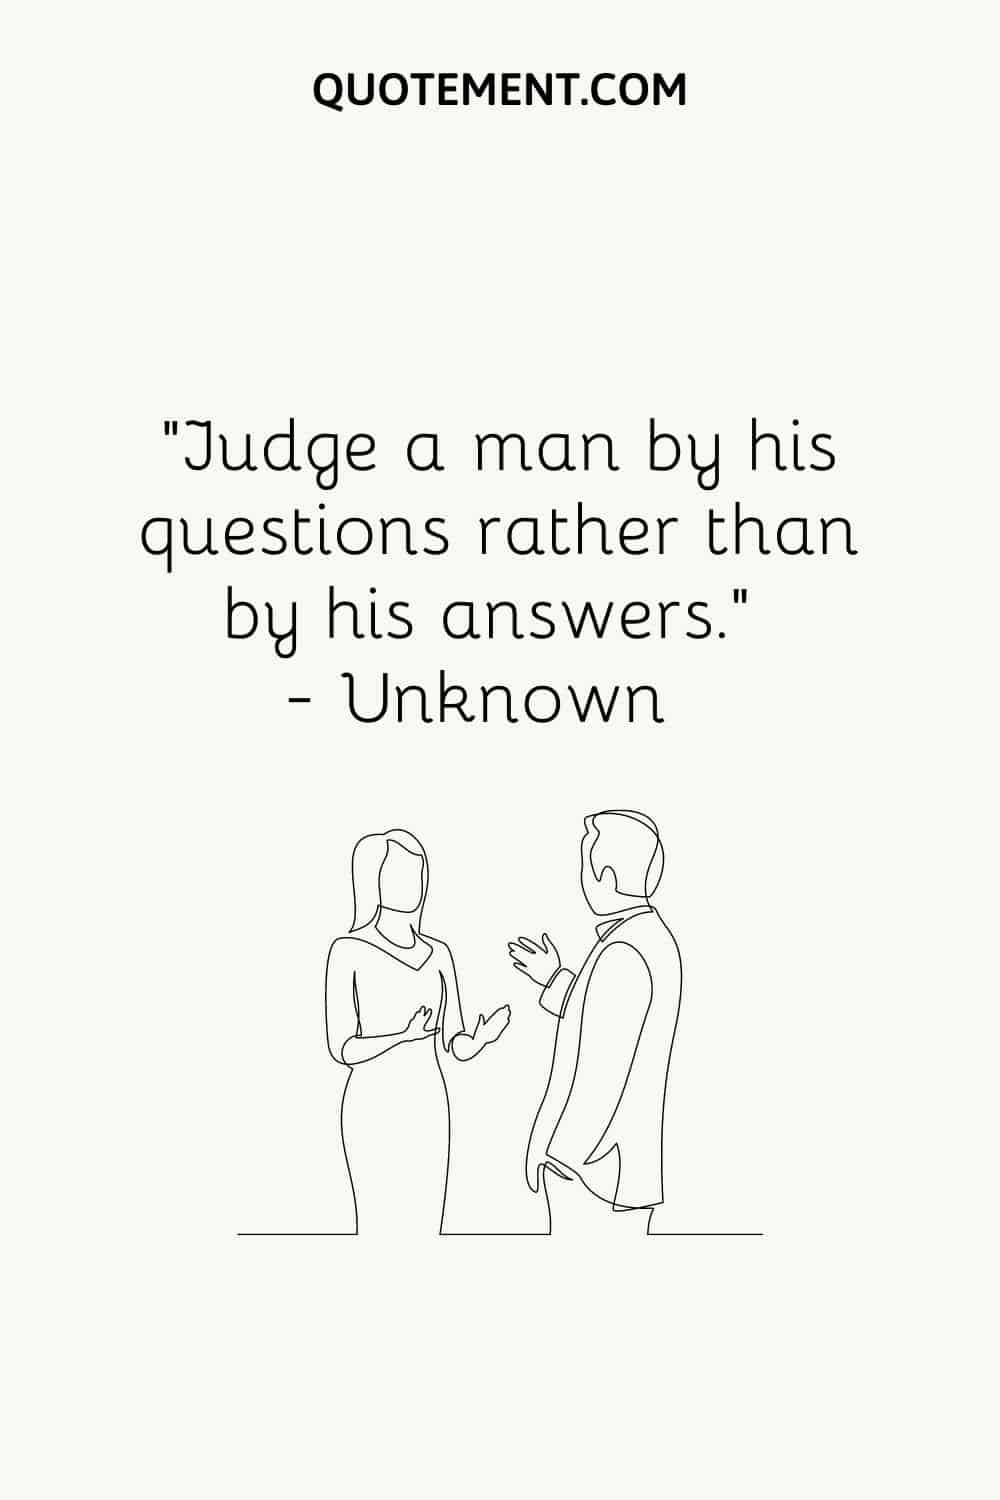 “Judge a man by his questions rather than by his answers.” — Unknown